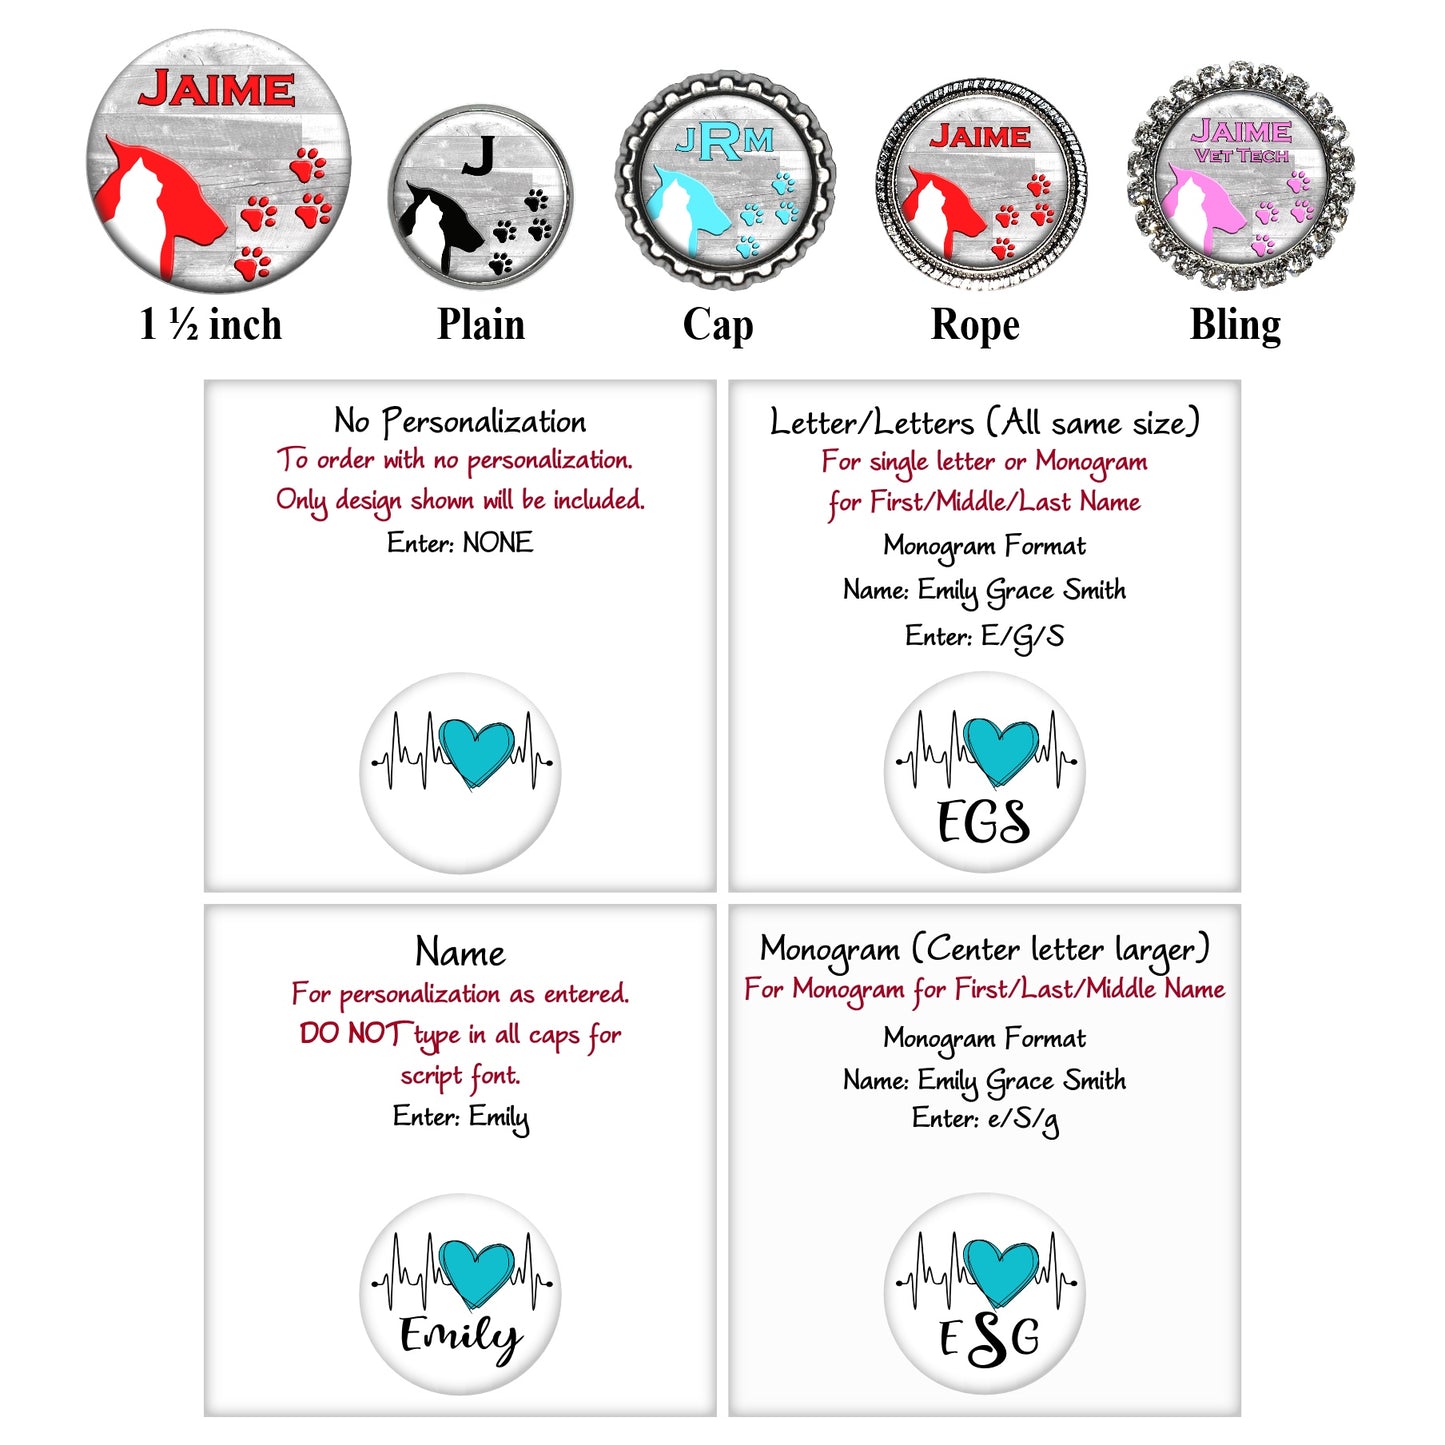 Veterinary Dog Paws (10 Colors) Stethoscope Id Tag